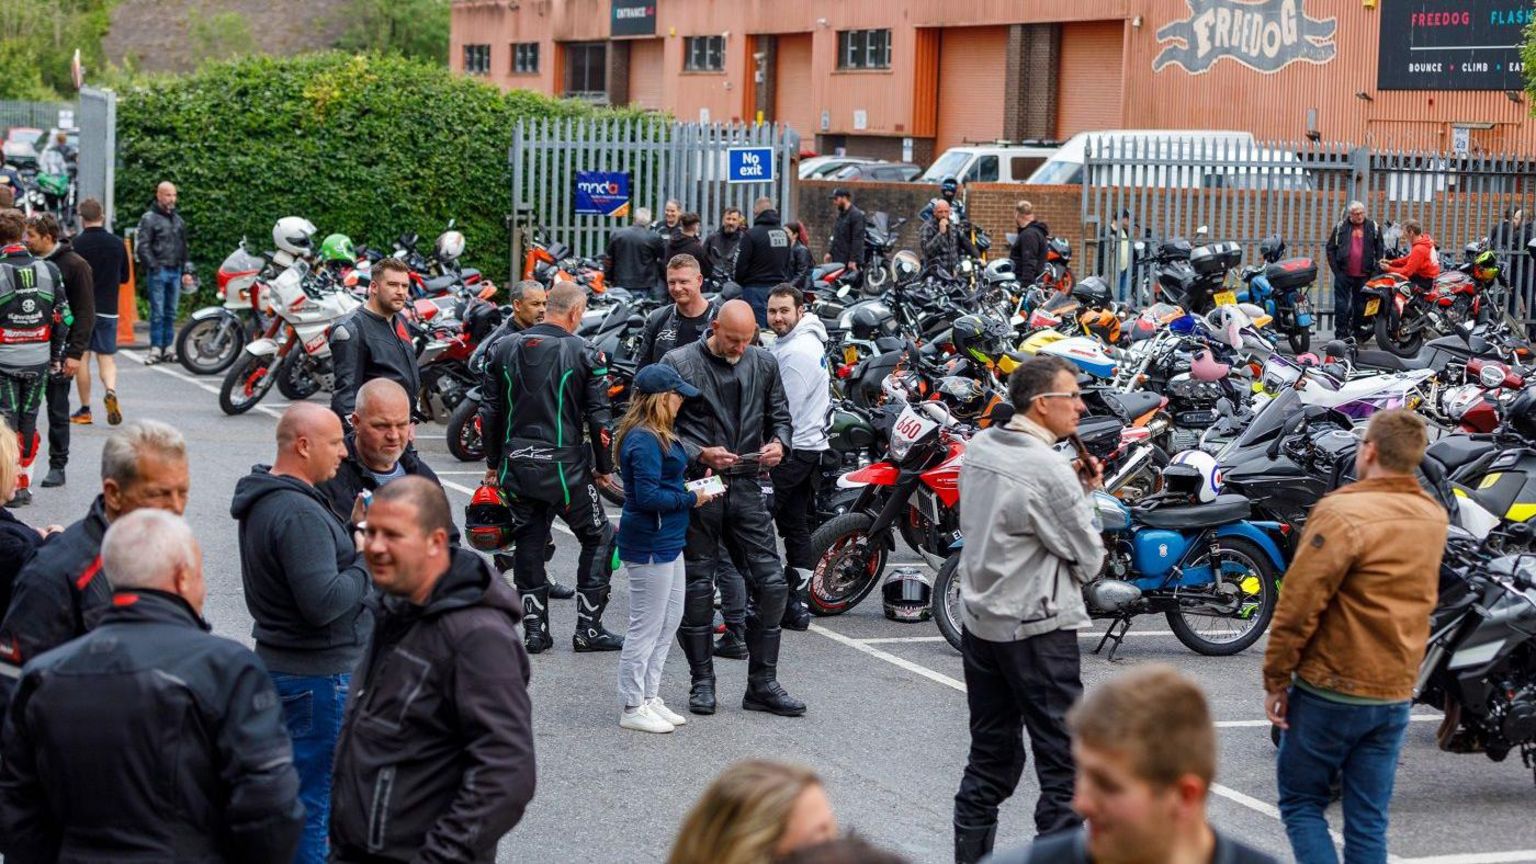 Dozens of motorcyclists gather in the main car park at Fowlers in Bristol